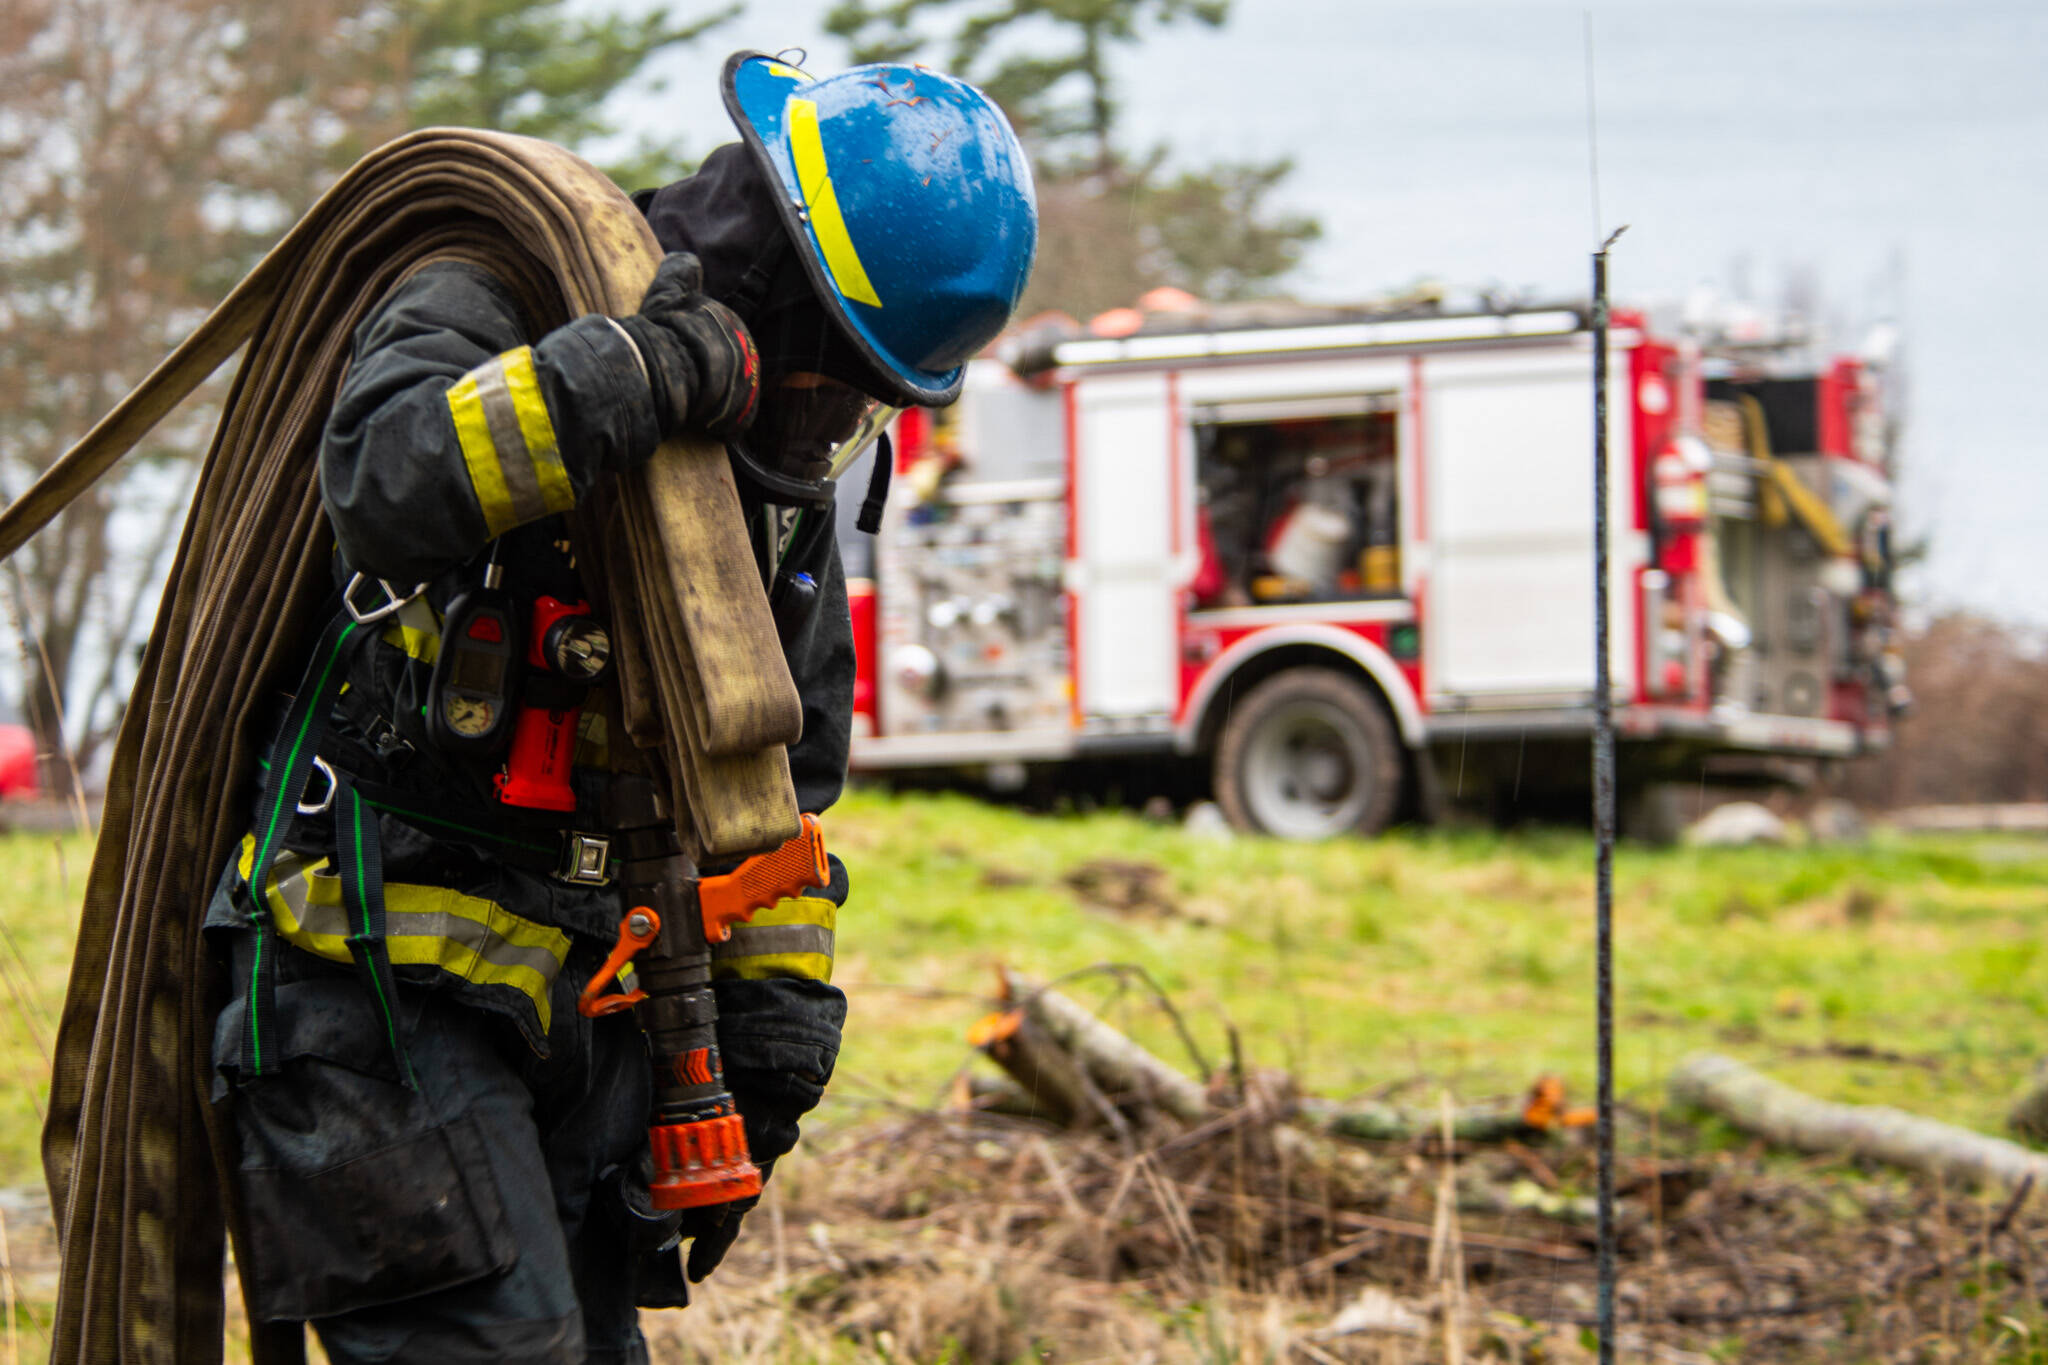 A firefighter recruit pulling deploying hose at live fire training in February.